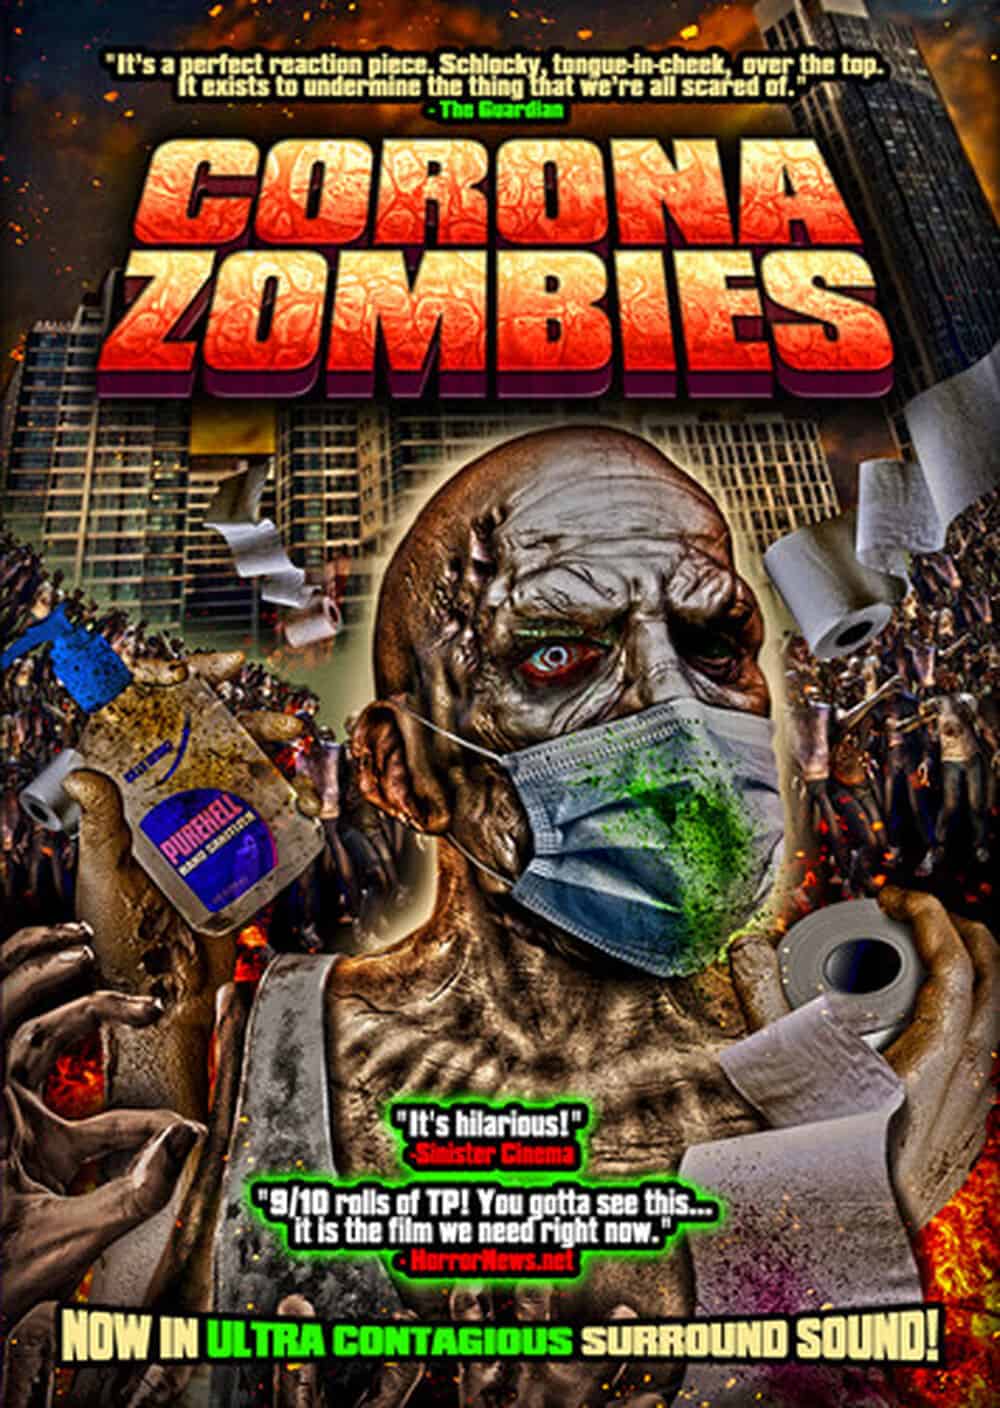 Mike’s Review: Corona Zombies (2020)